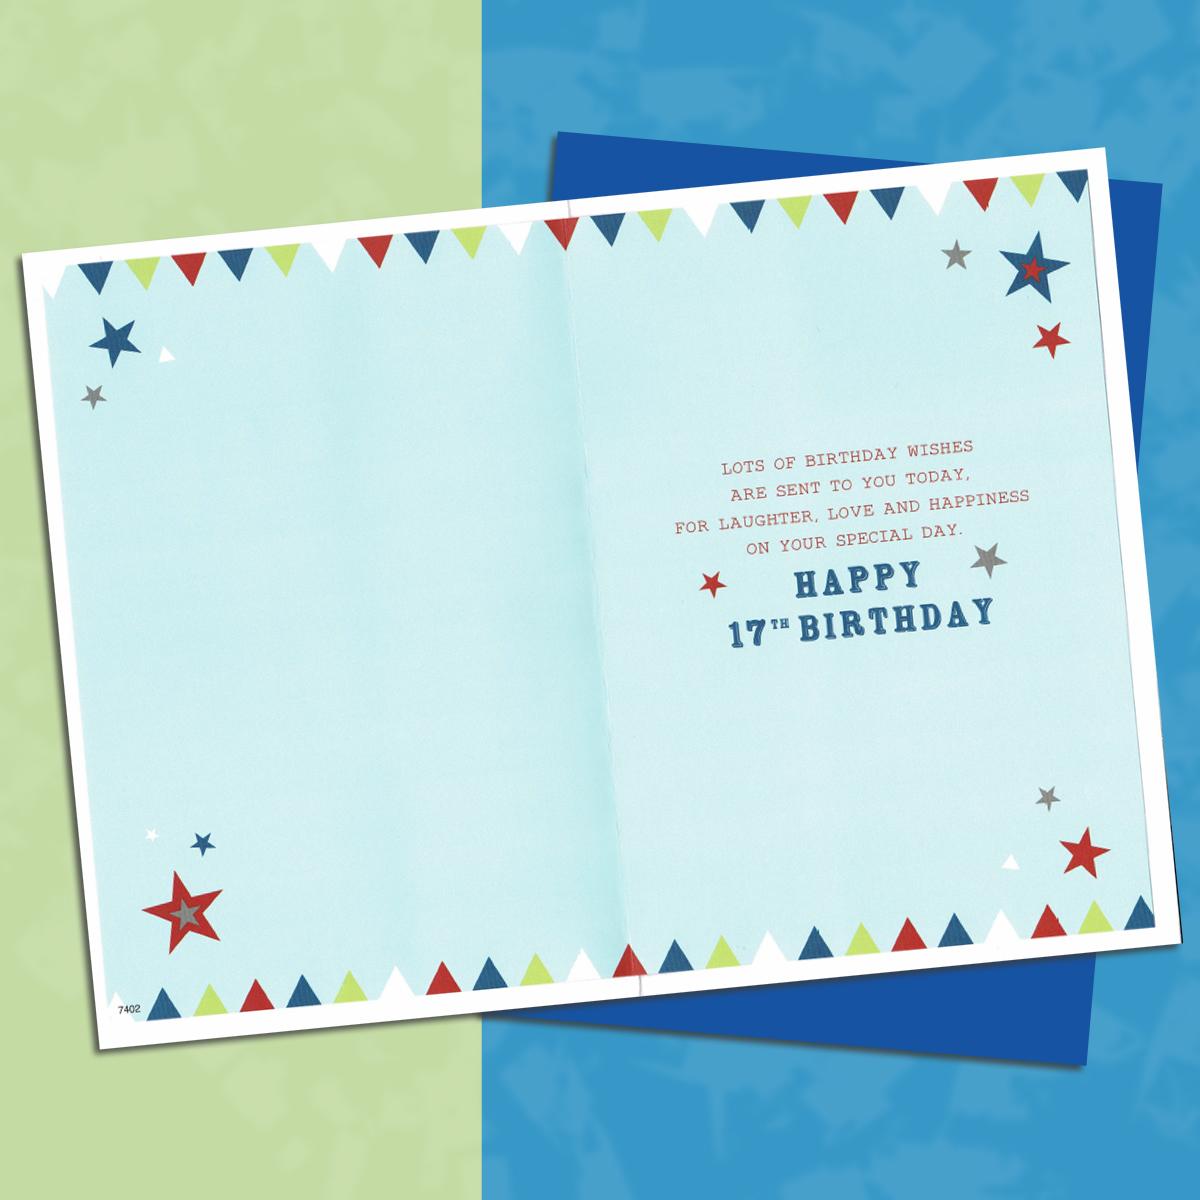 Inside Image Of Son Age 17 Birthday Card Showing Layout And Printed Text